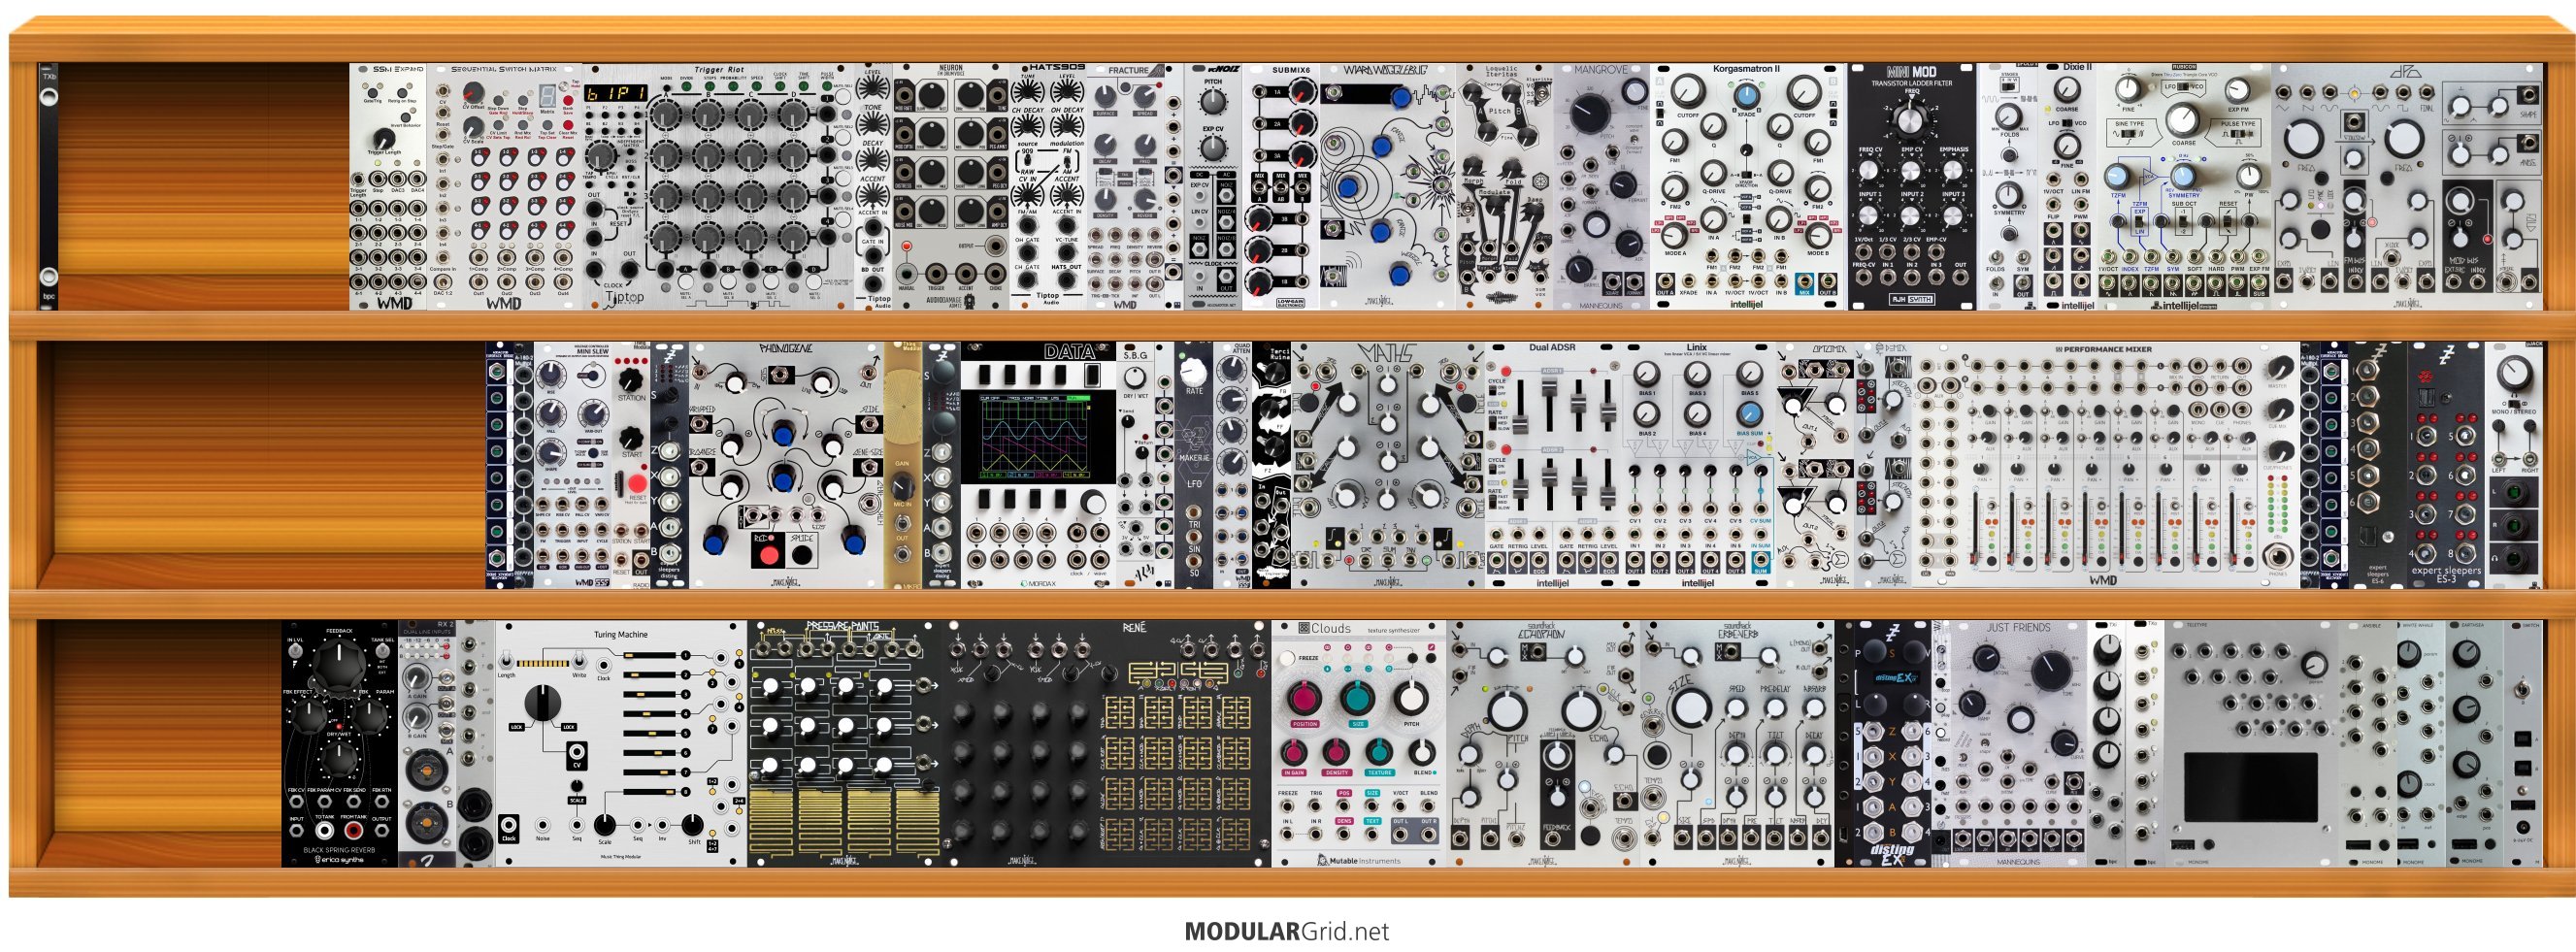 Show us your modular system - Equipment - lines